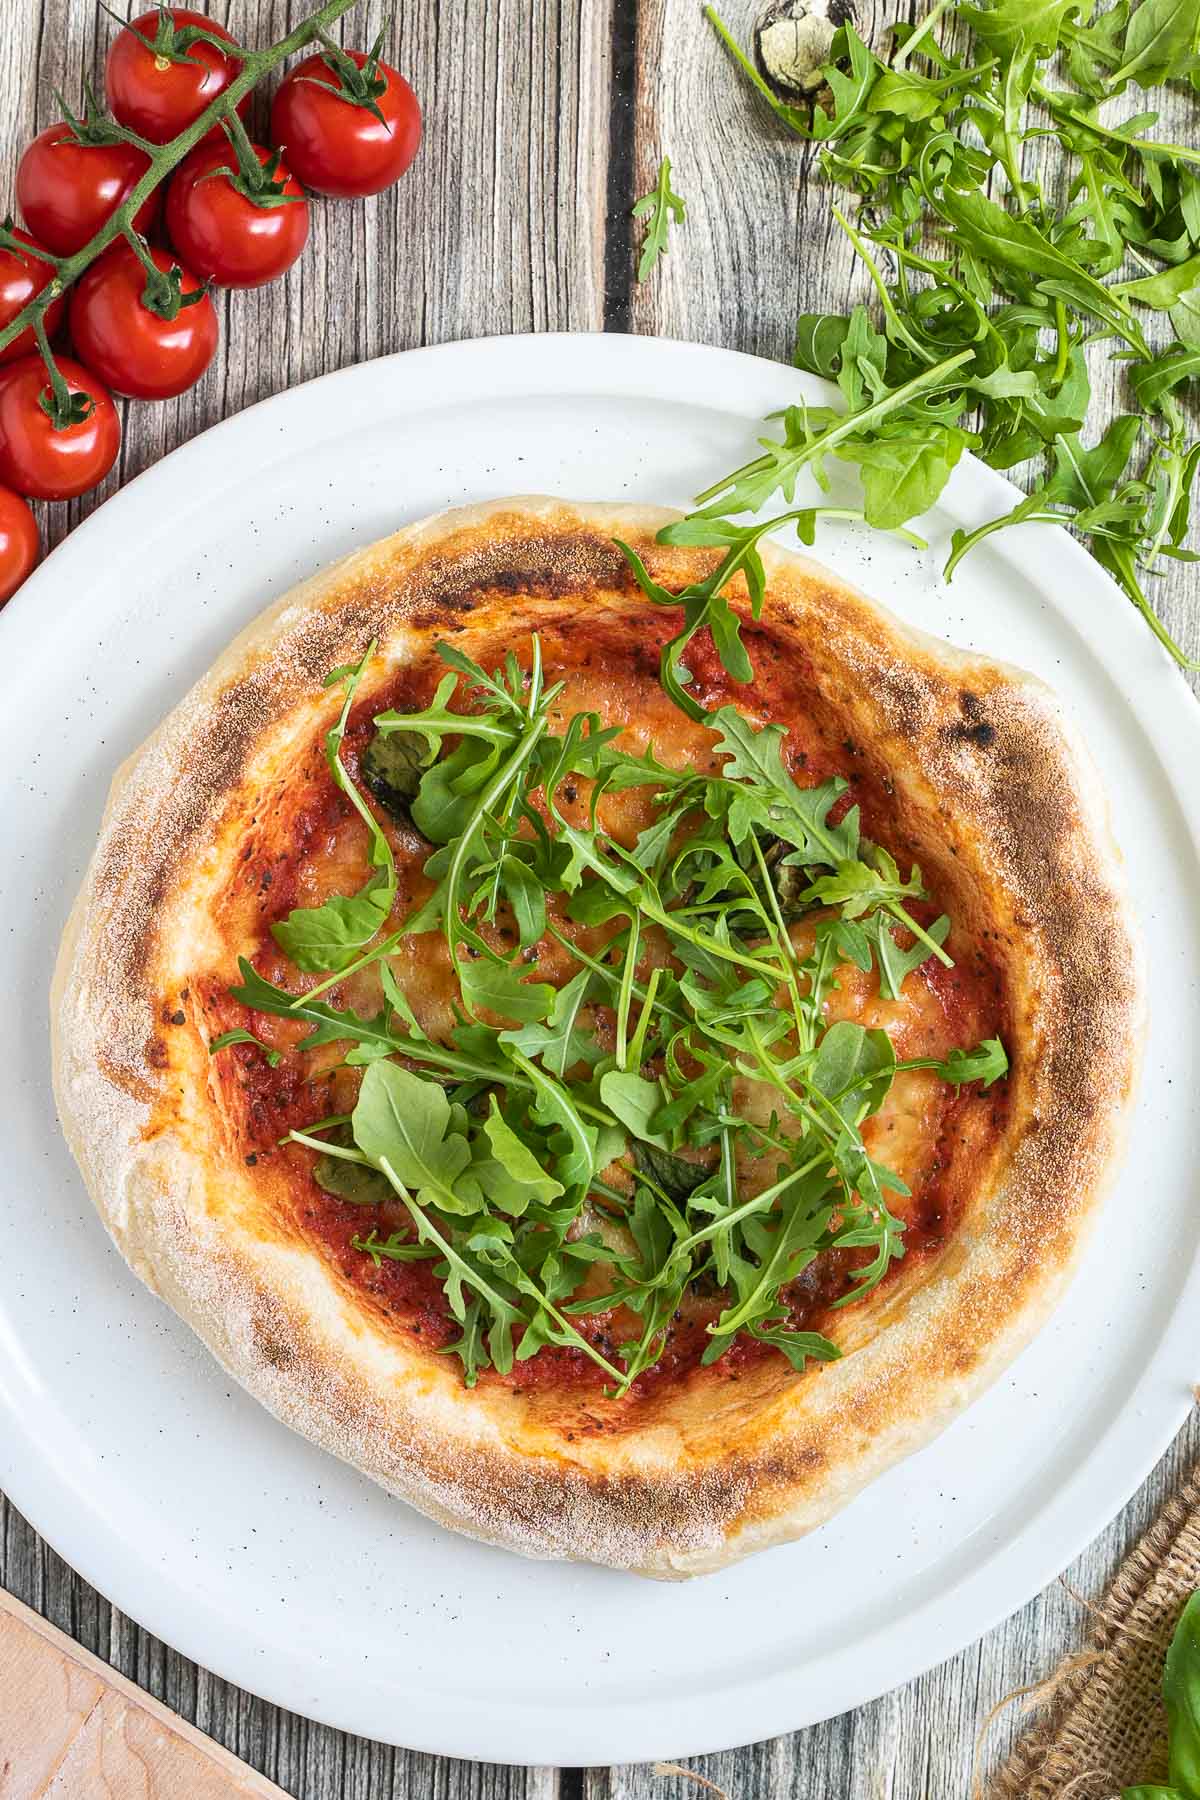 Sliced pizza topped with tomato sauce, melted cheese and fresh arugula on a white pizza plate. Fresh ingredients are around it.